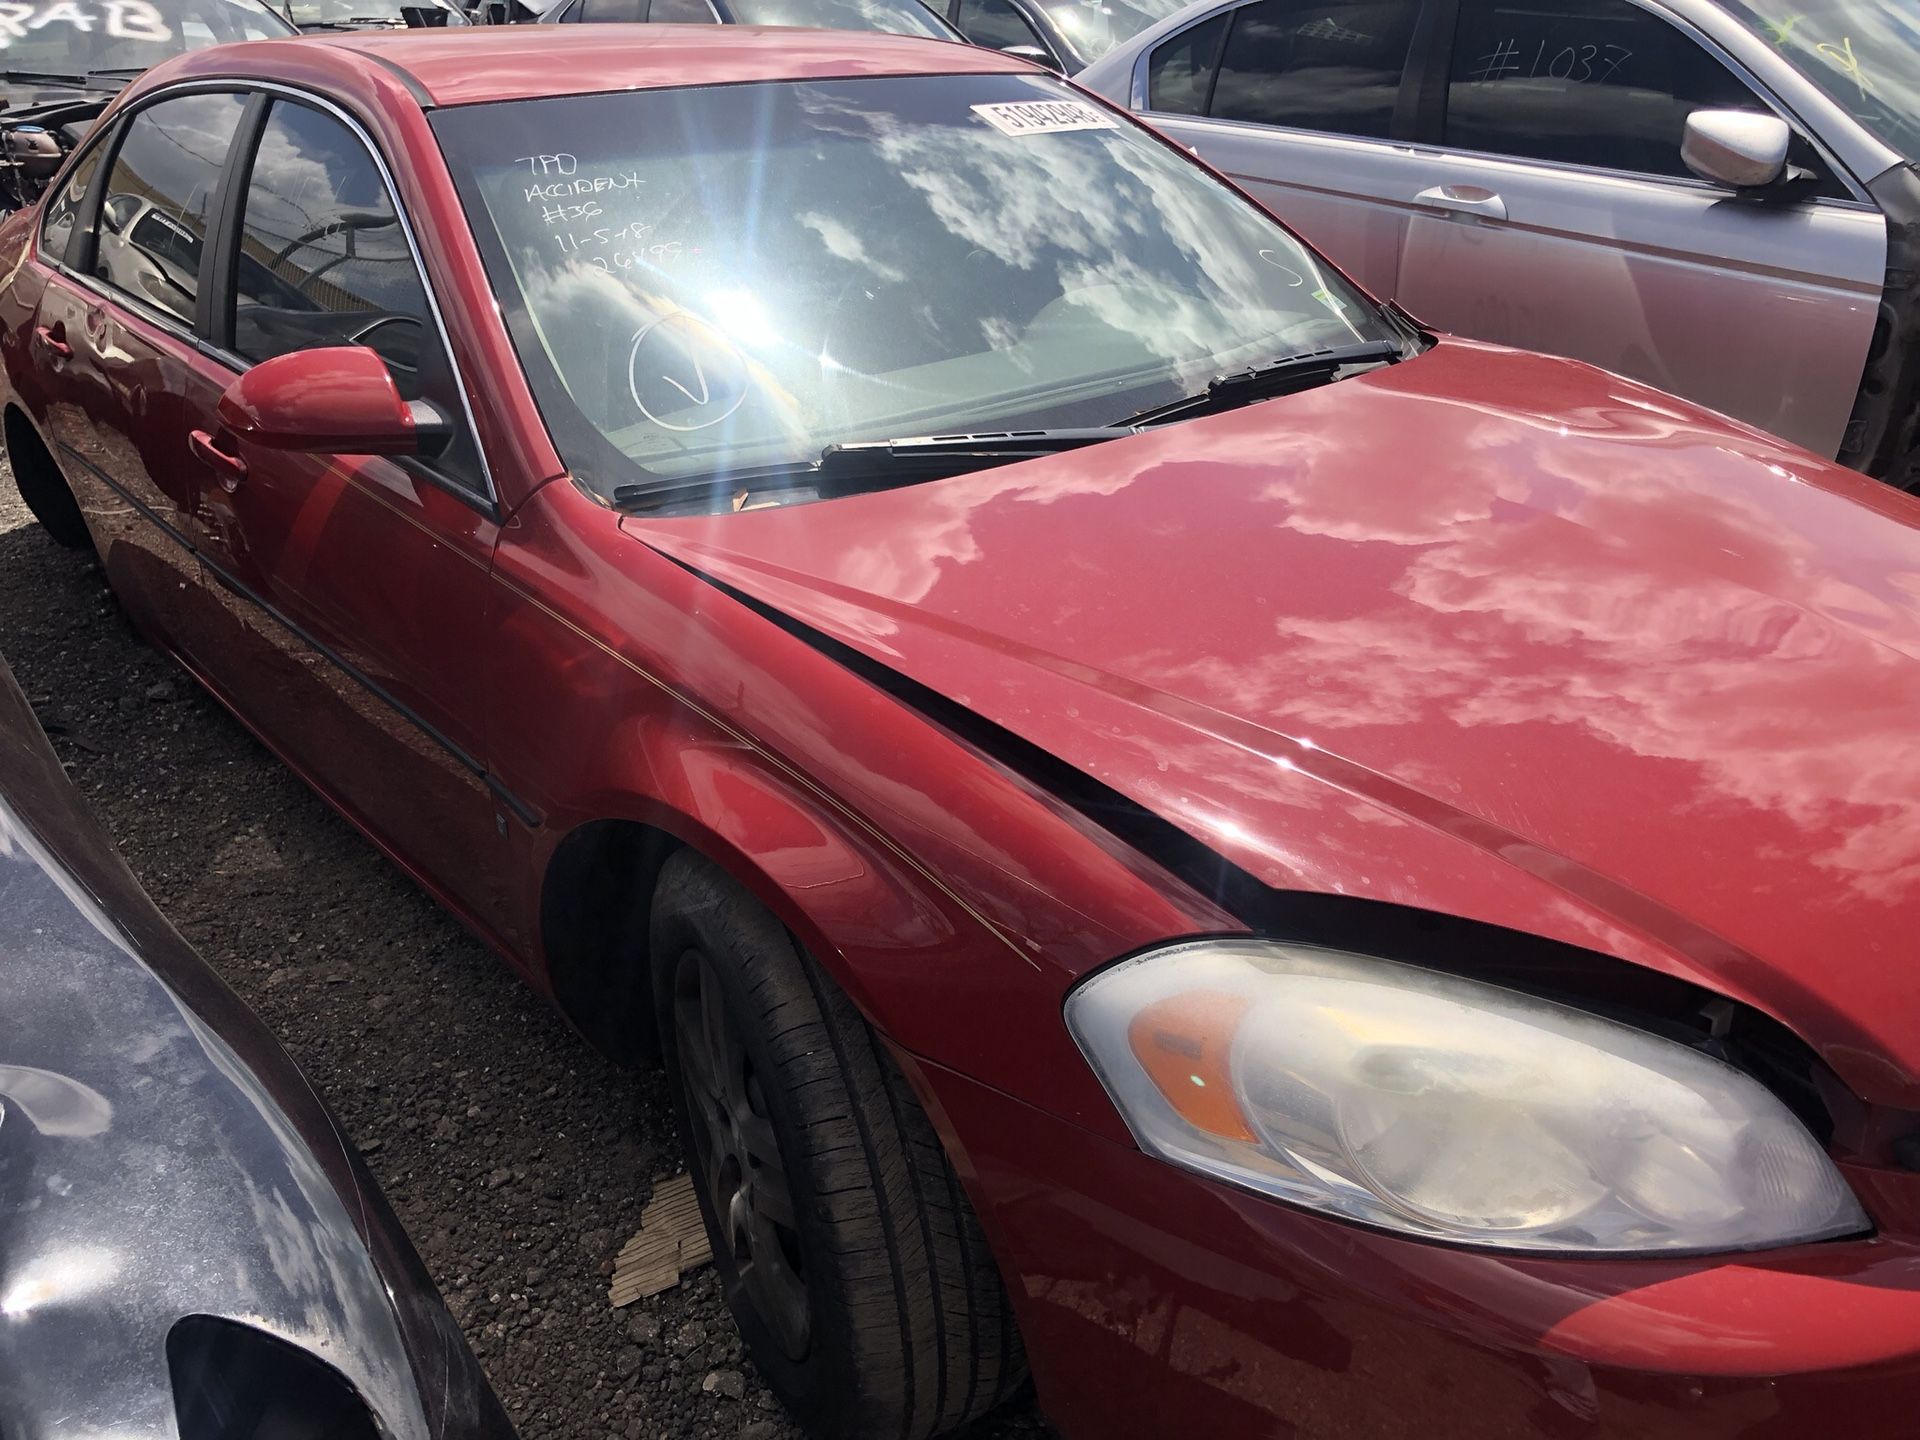 2008 Chevy impala parts only